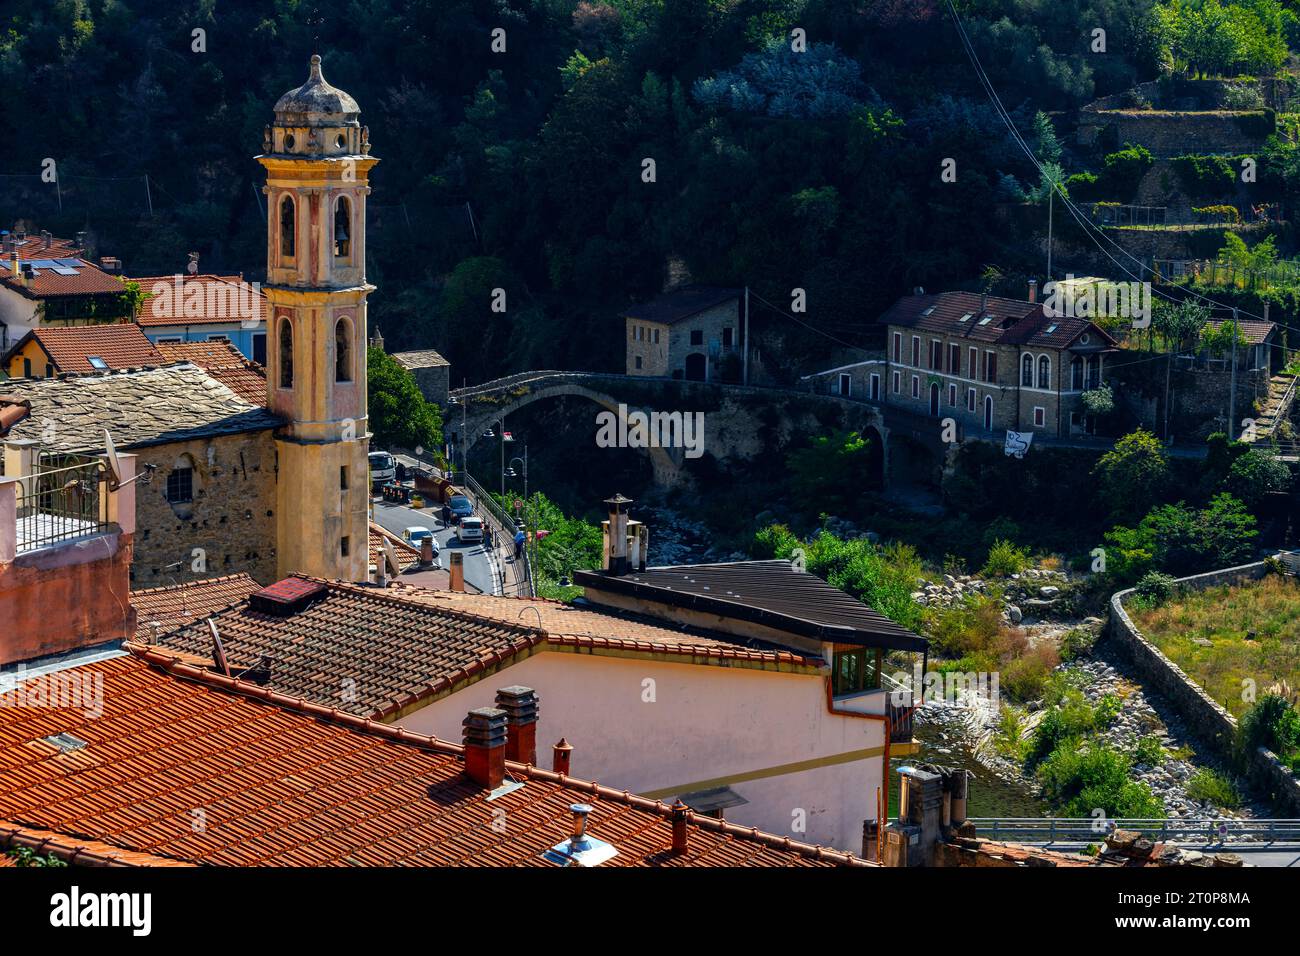 Elevated panoramic view of small Ligurian town Badalucco located by Argentina river. Badalucco is a comune in province of Imperia in Liguria. Italy. Stock Photo